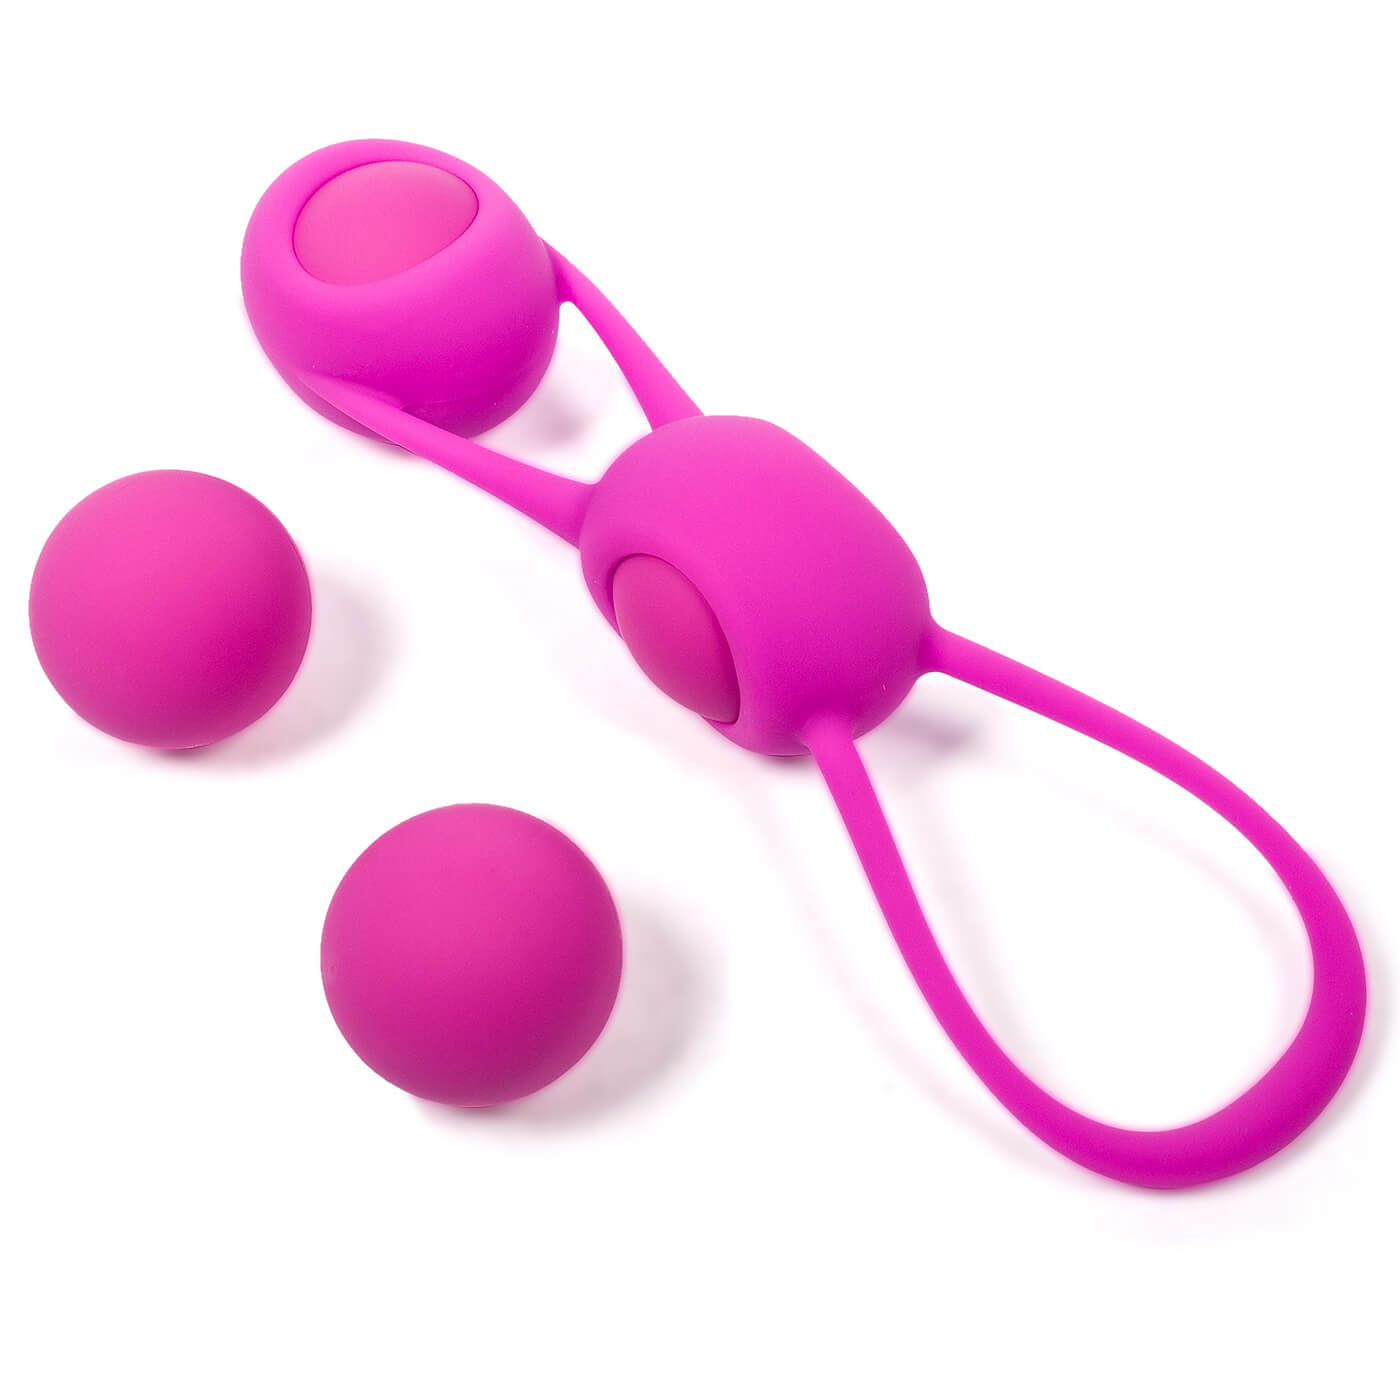 Kegel Training Kit With 4 Weighted Balls & Premium Silicone Pouch